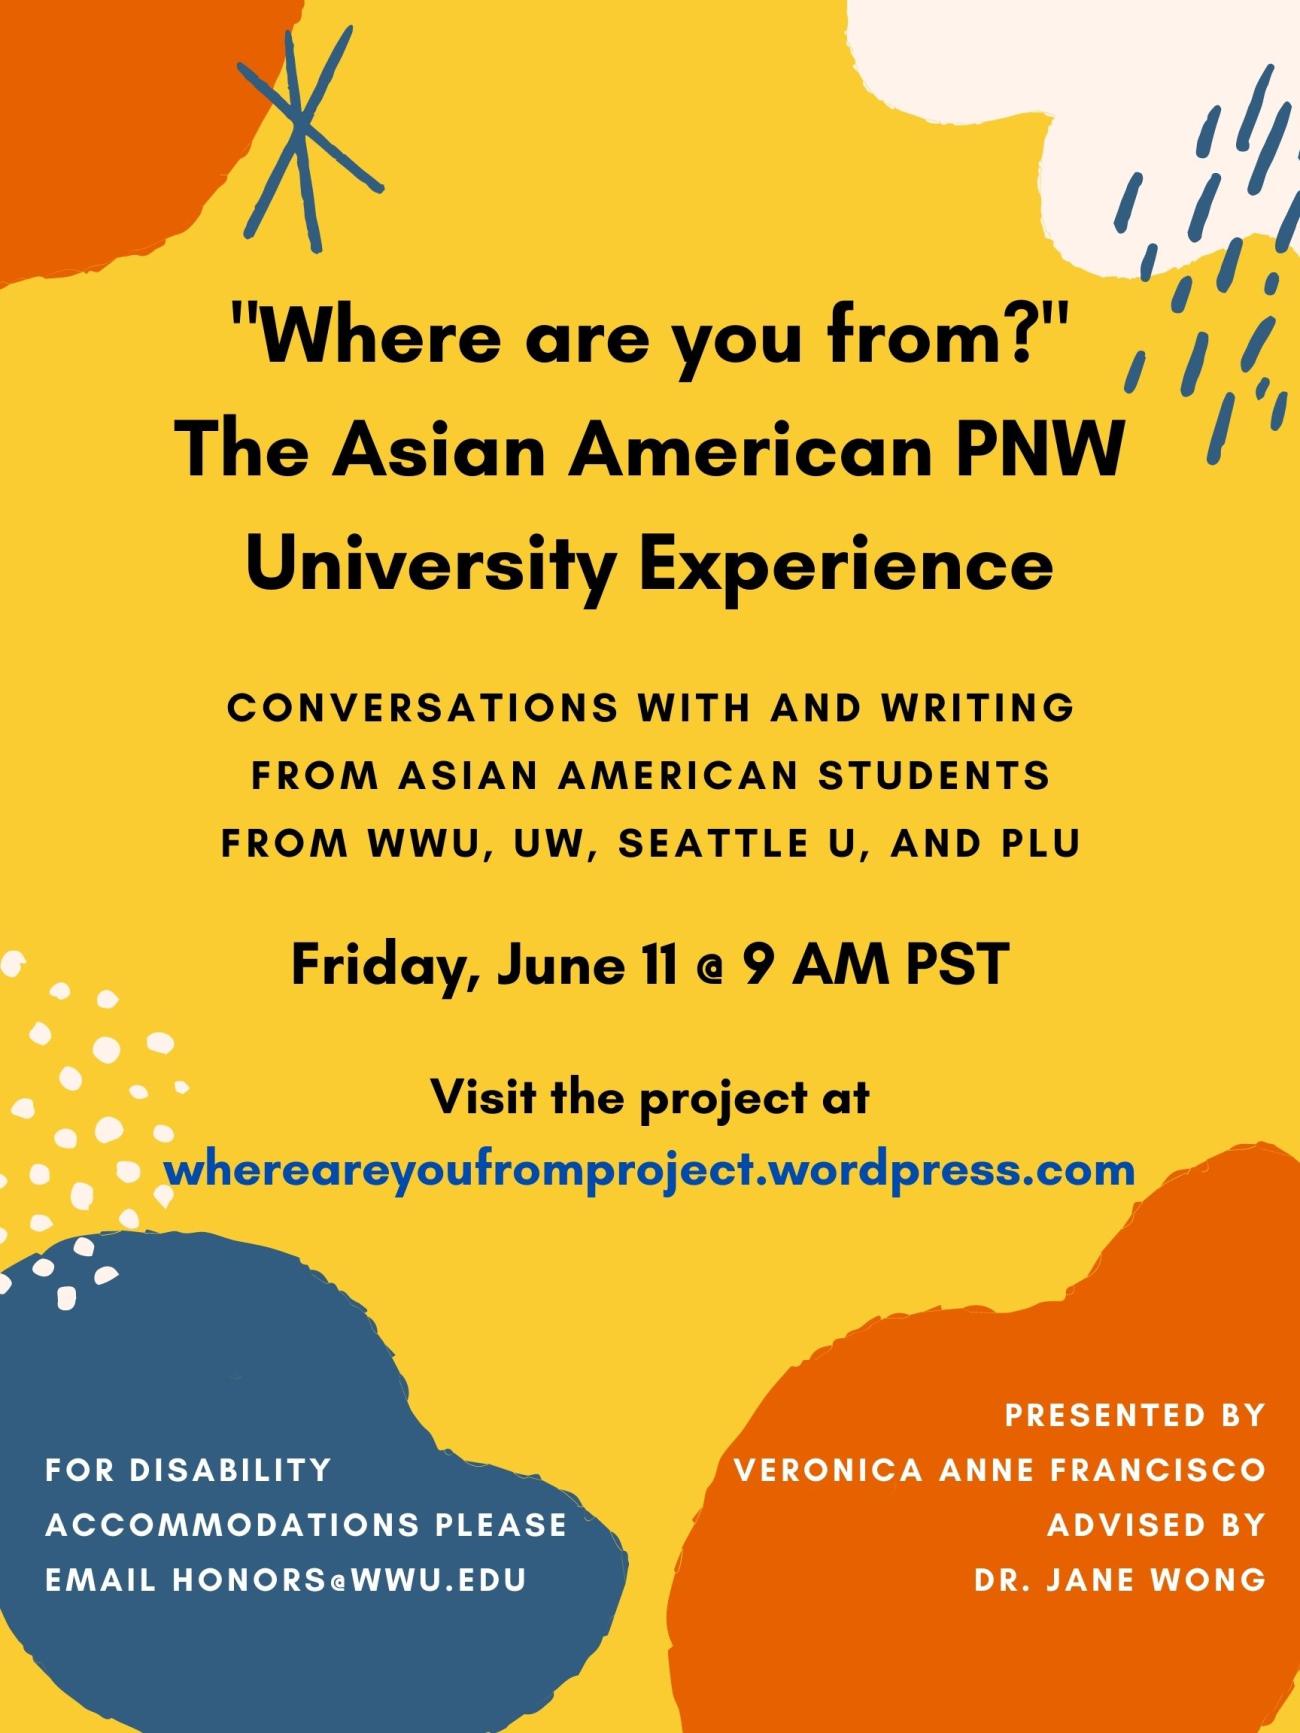 On a yellow background, orange, blue, and cream abstract shapes frame text. Text reads "Where are you from? The Asian American PNW University Experience. Conversations with and writing from Asian American students from WWU, UW, Seattle U, and PLU. Friday, June 11th @ 9 AM PST. Visit the project at whereareyoufromproject.wordpress.com. Presented by Veronica Anne Francisco, Advised by Dr. Jane Wong. For Disability Accommodations please email honors@wwu.edu".